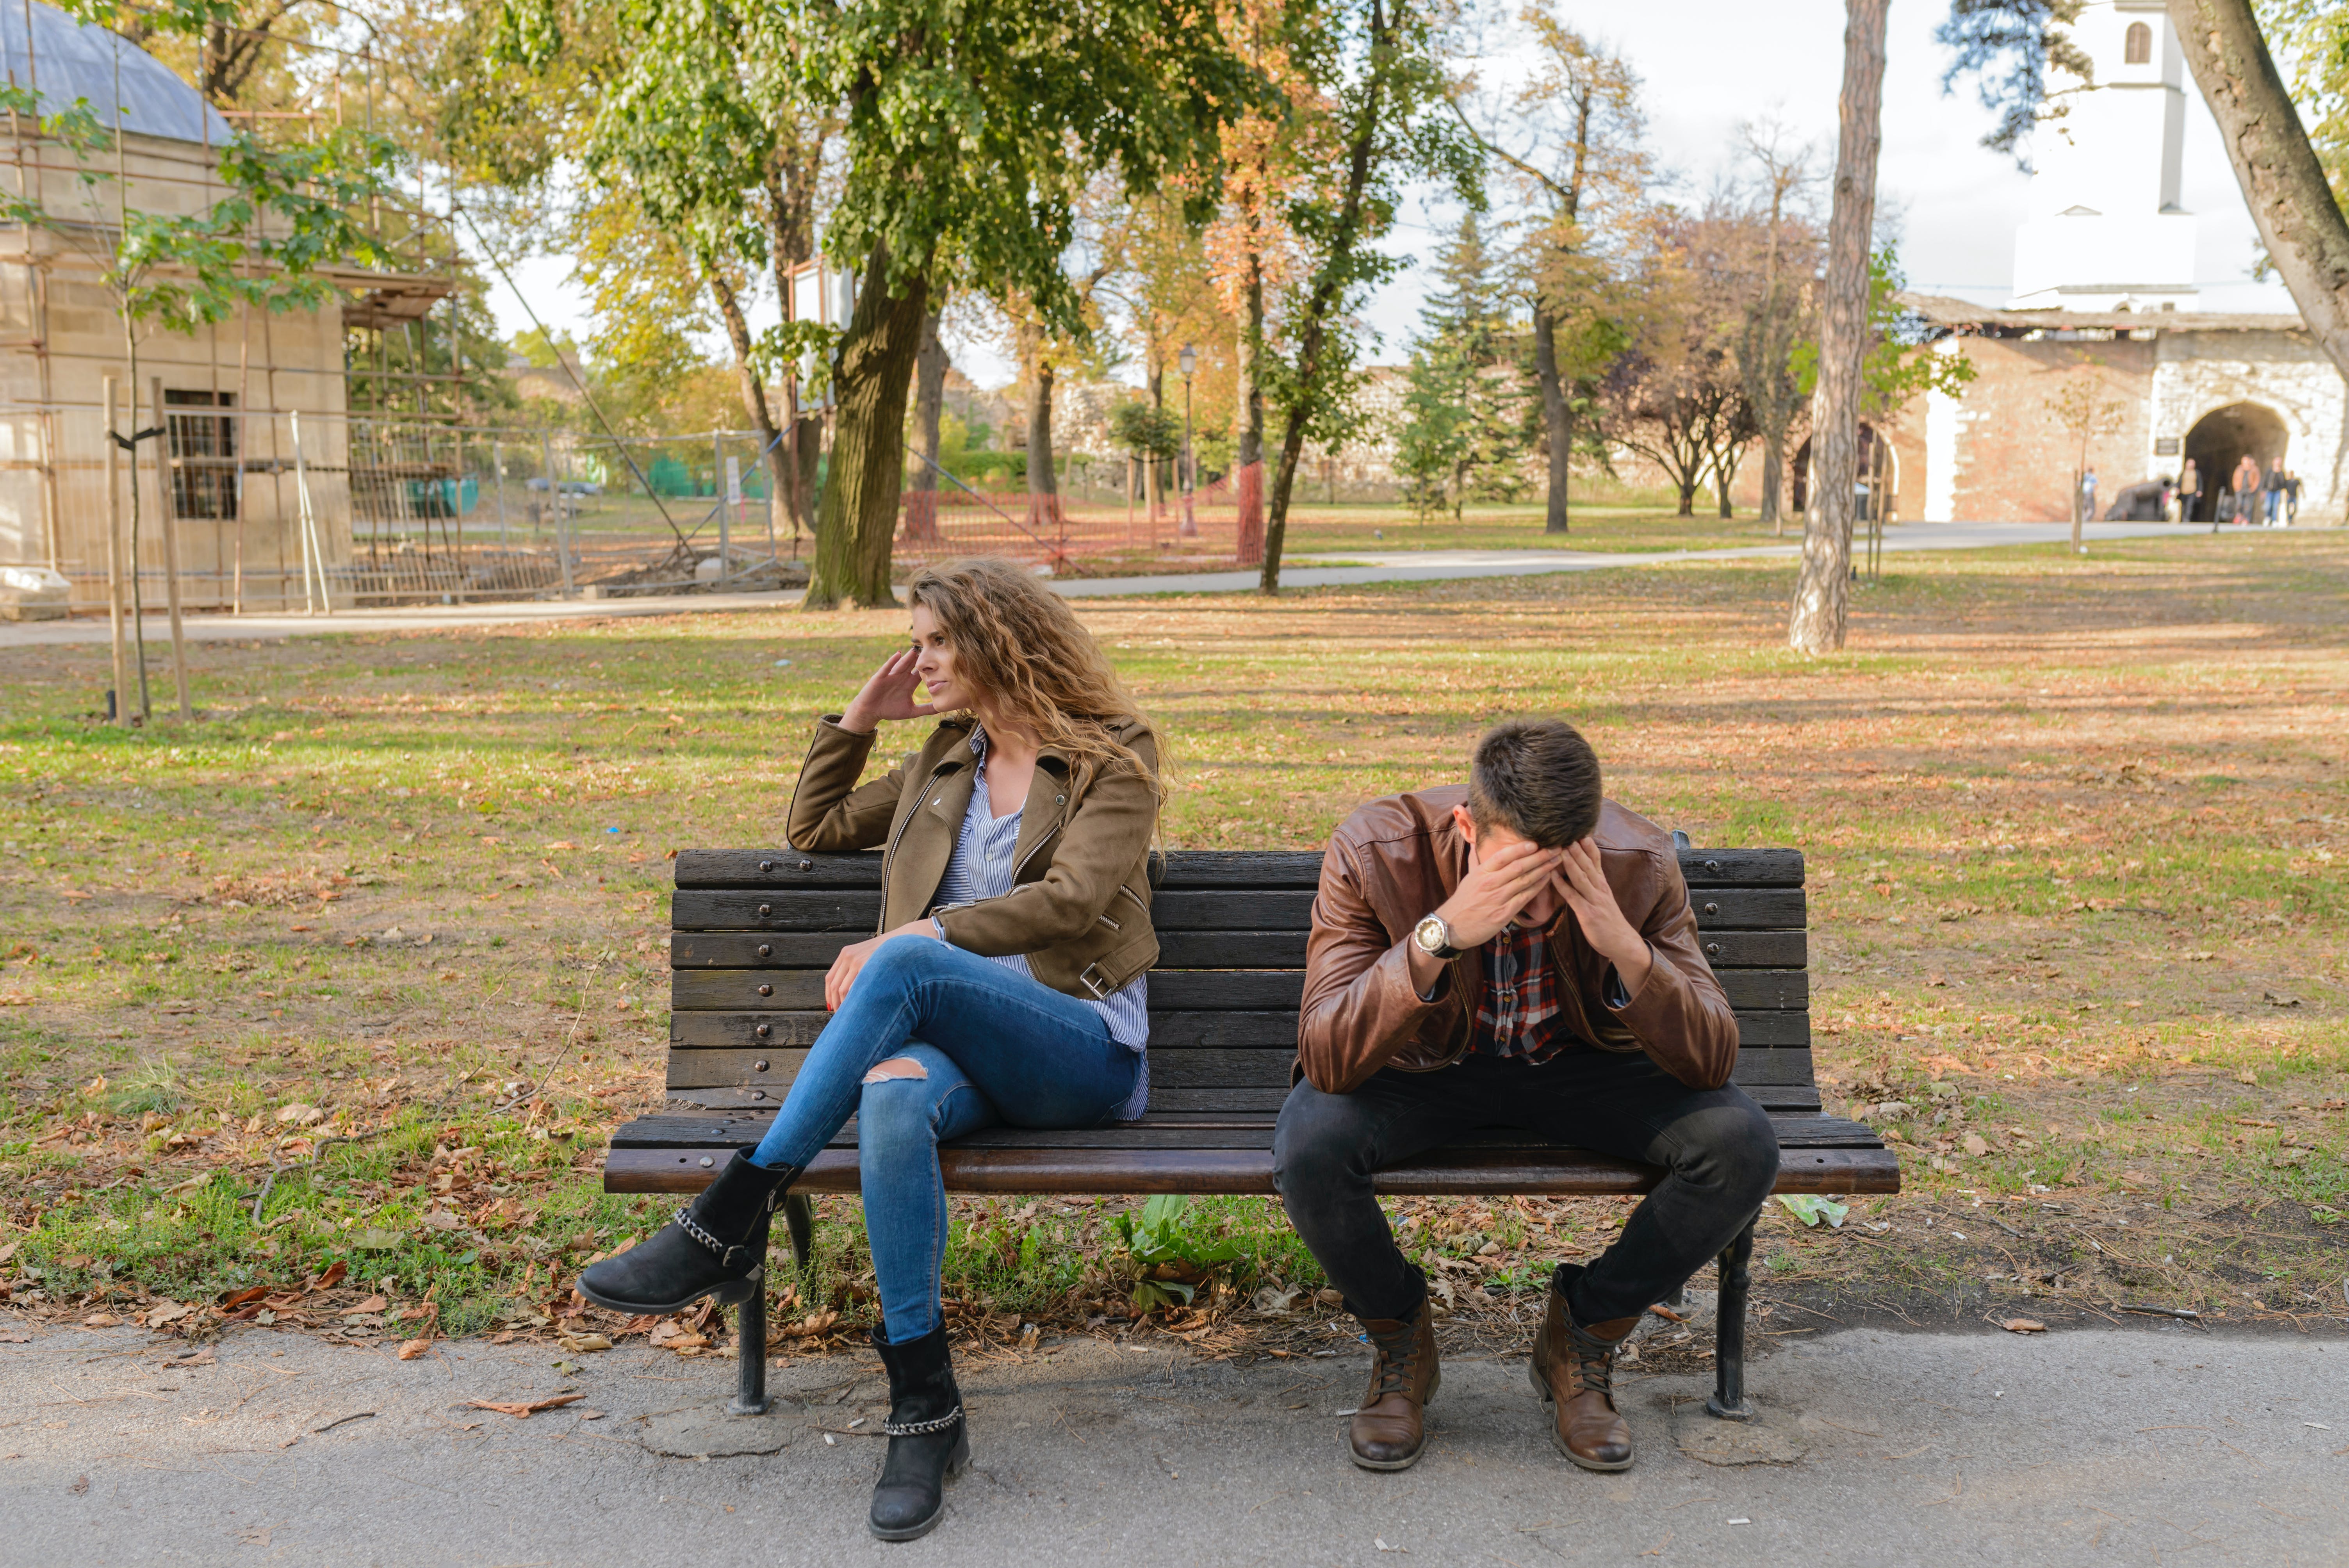 A man and a woman sitting on a bench | Source: Pexels